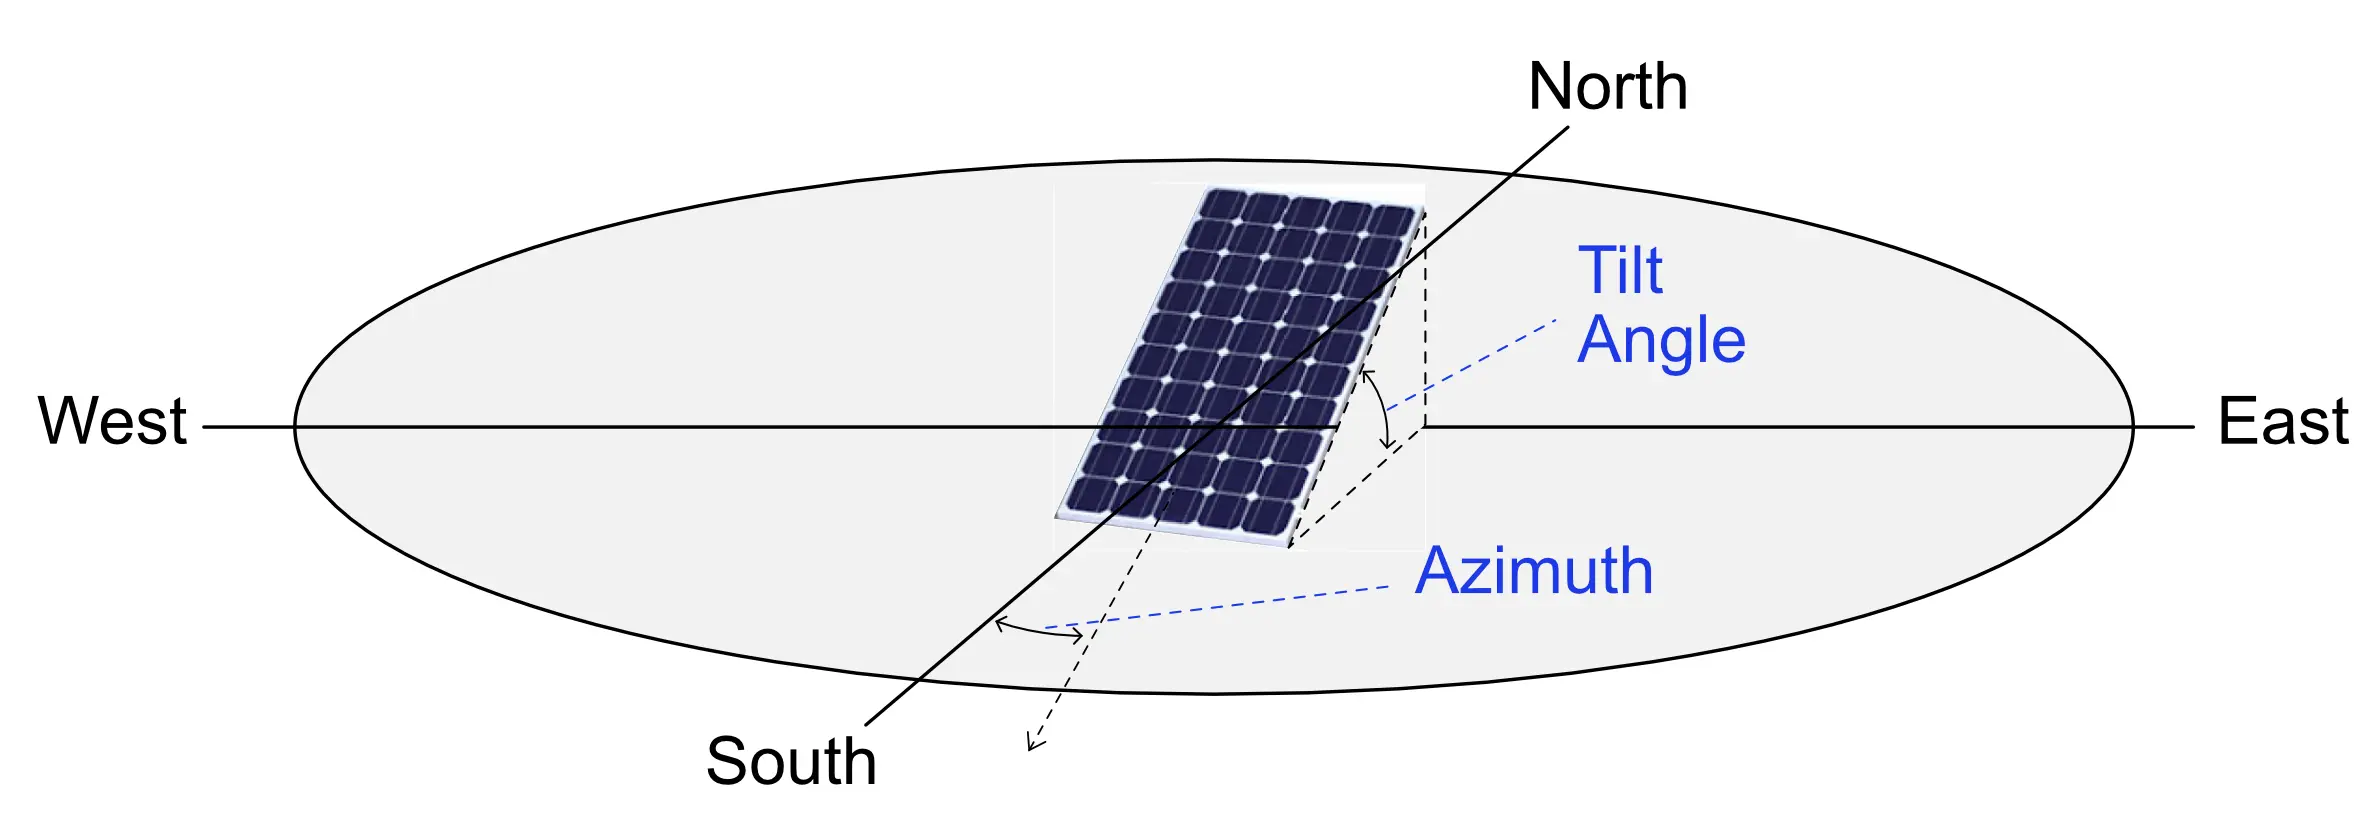 which way should solar panels face - Which direction should solar panels face in South Africa